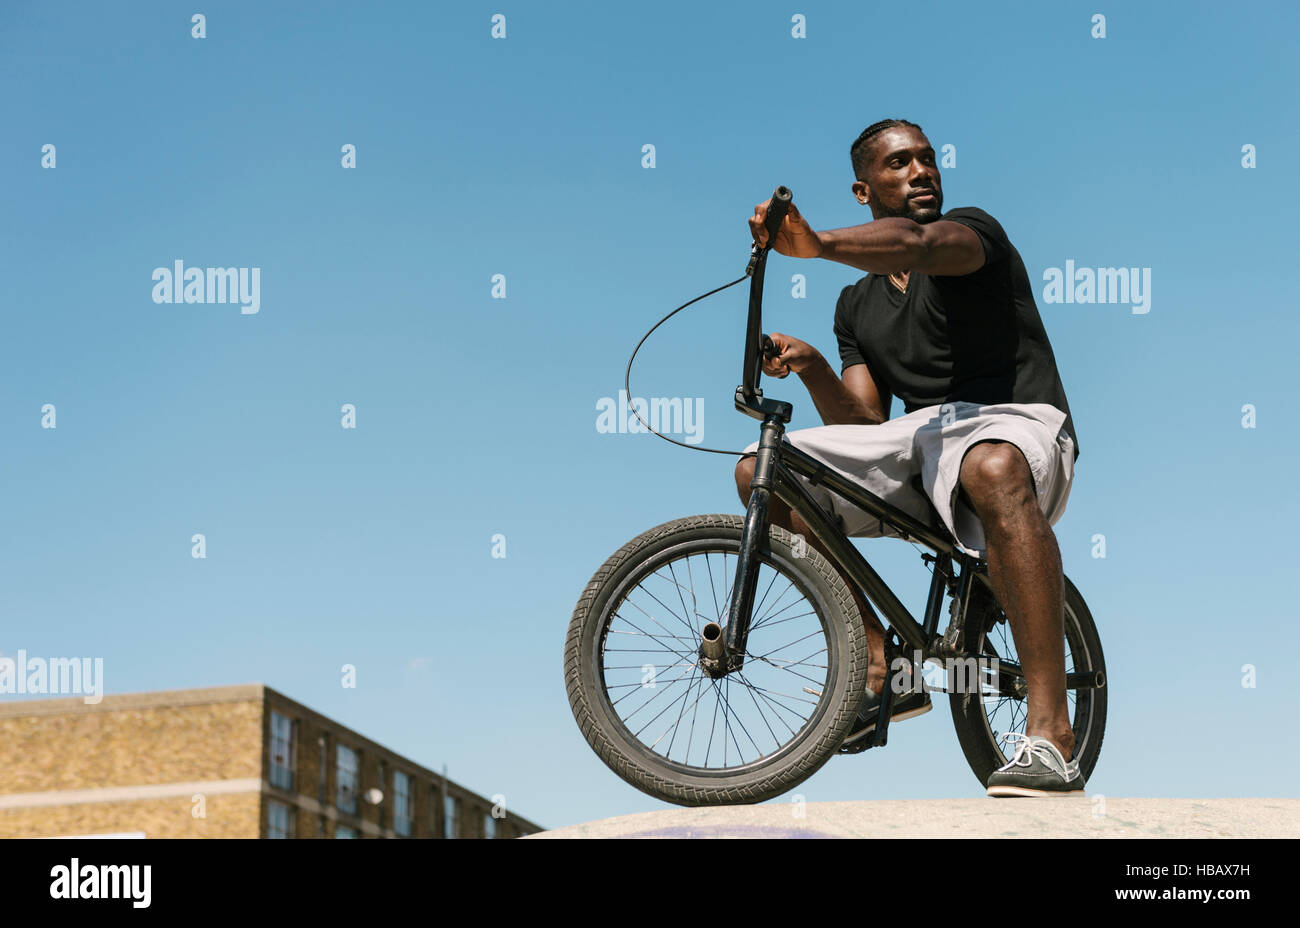 Young man on BMX bicycle looking over his shoulder in skatepark Stock Photo